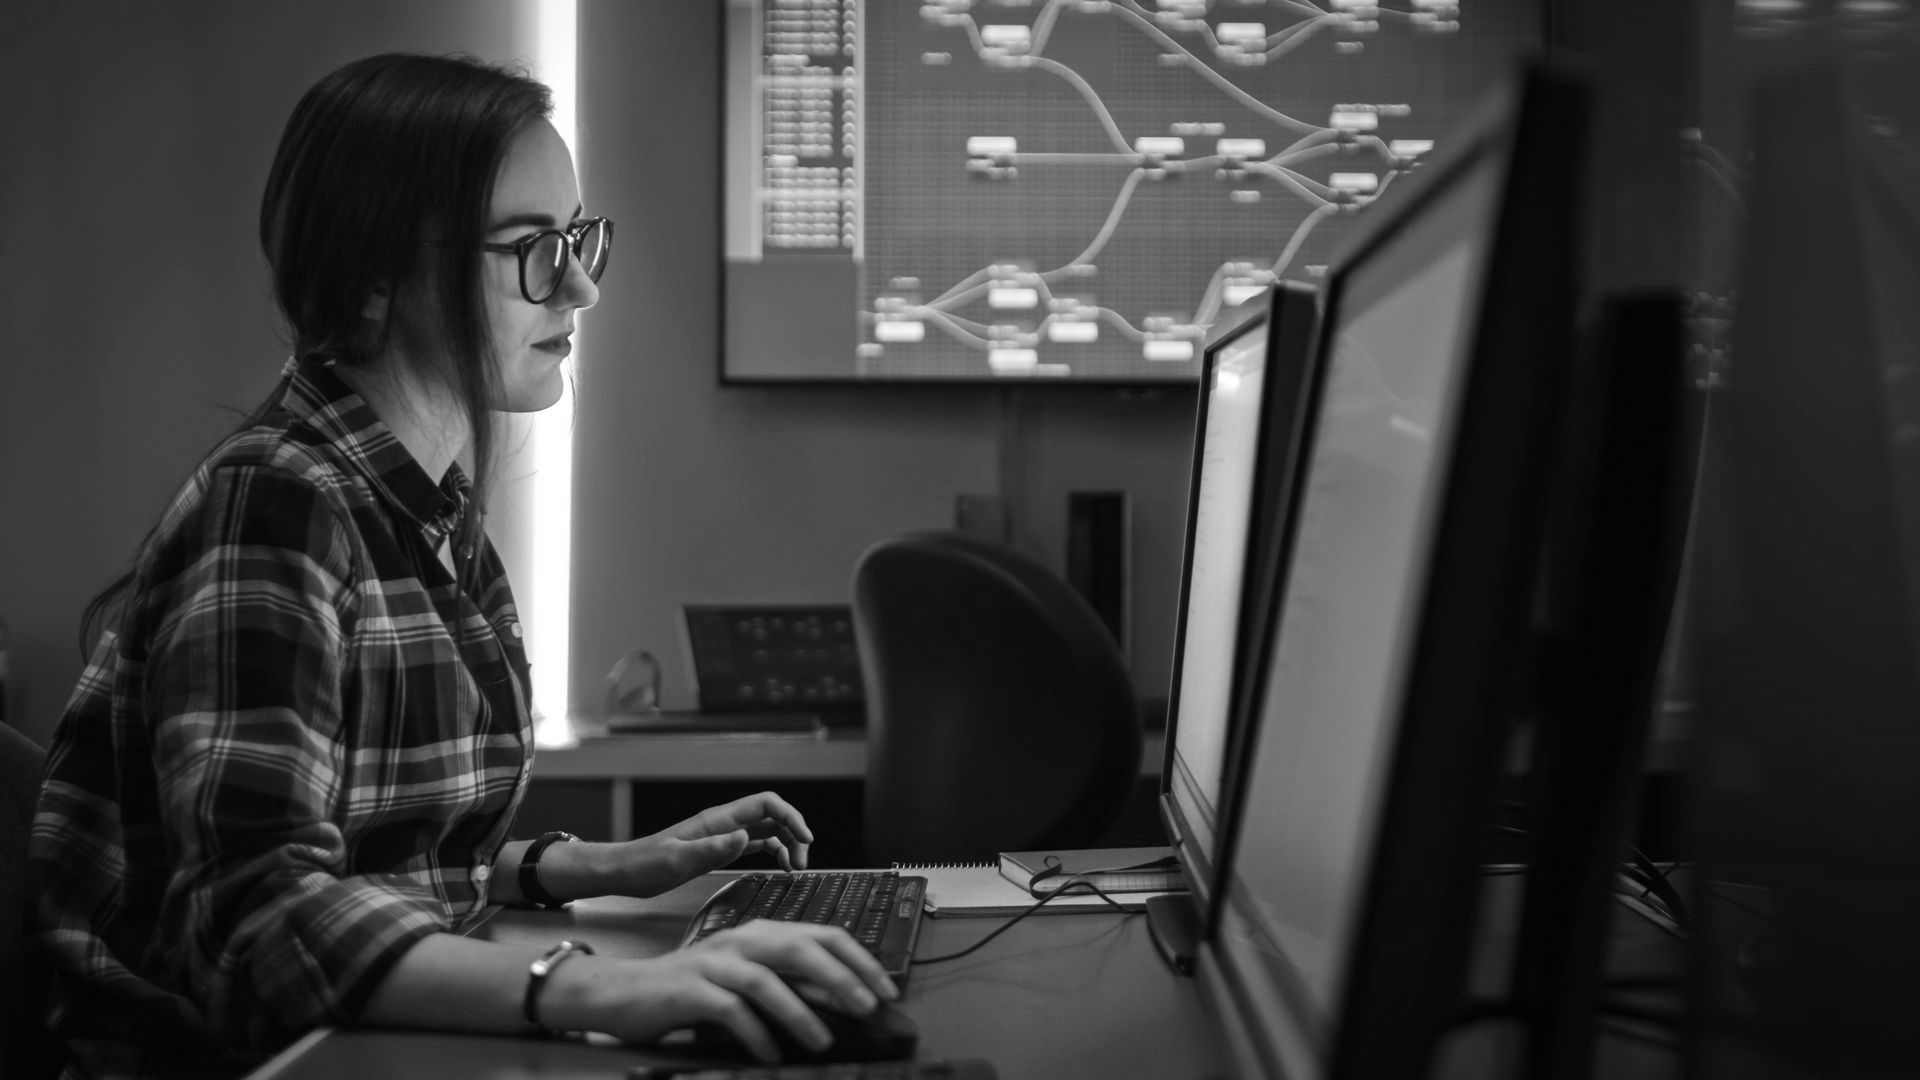 A young woman working in IT knows the importance of cyber security in the workplace